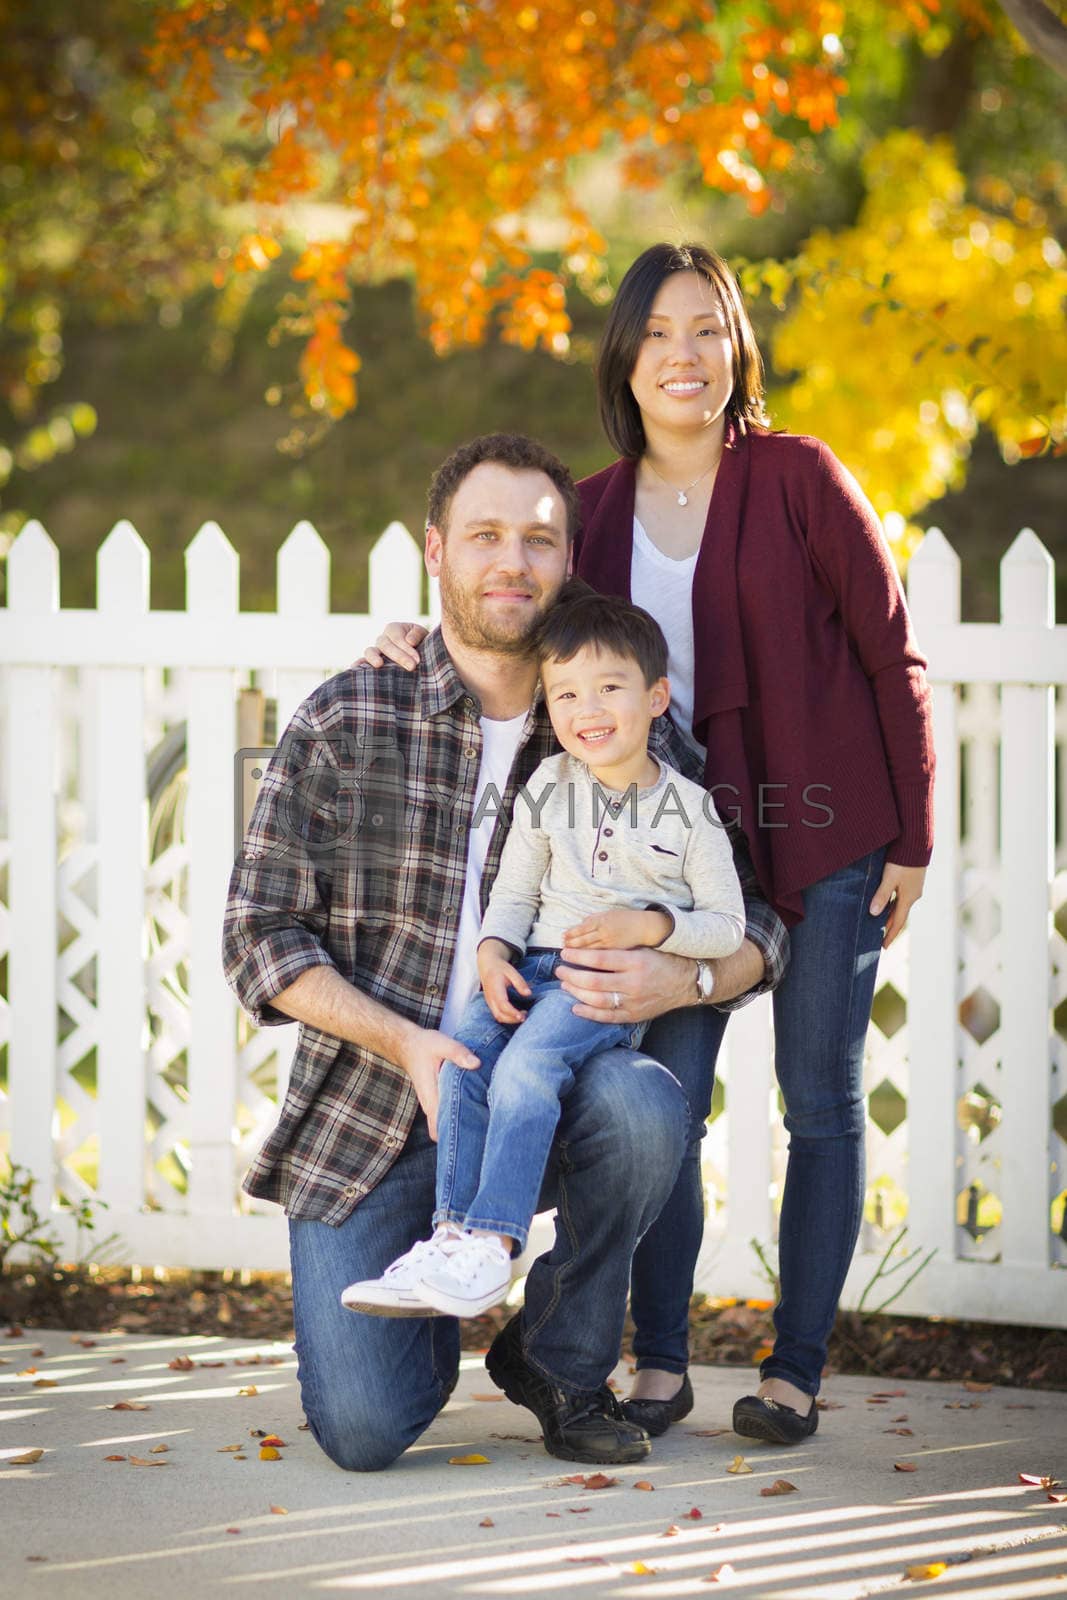 Royalty free image of Mixed Race Young Family Portrait Outdoors by Feverpitched